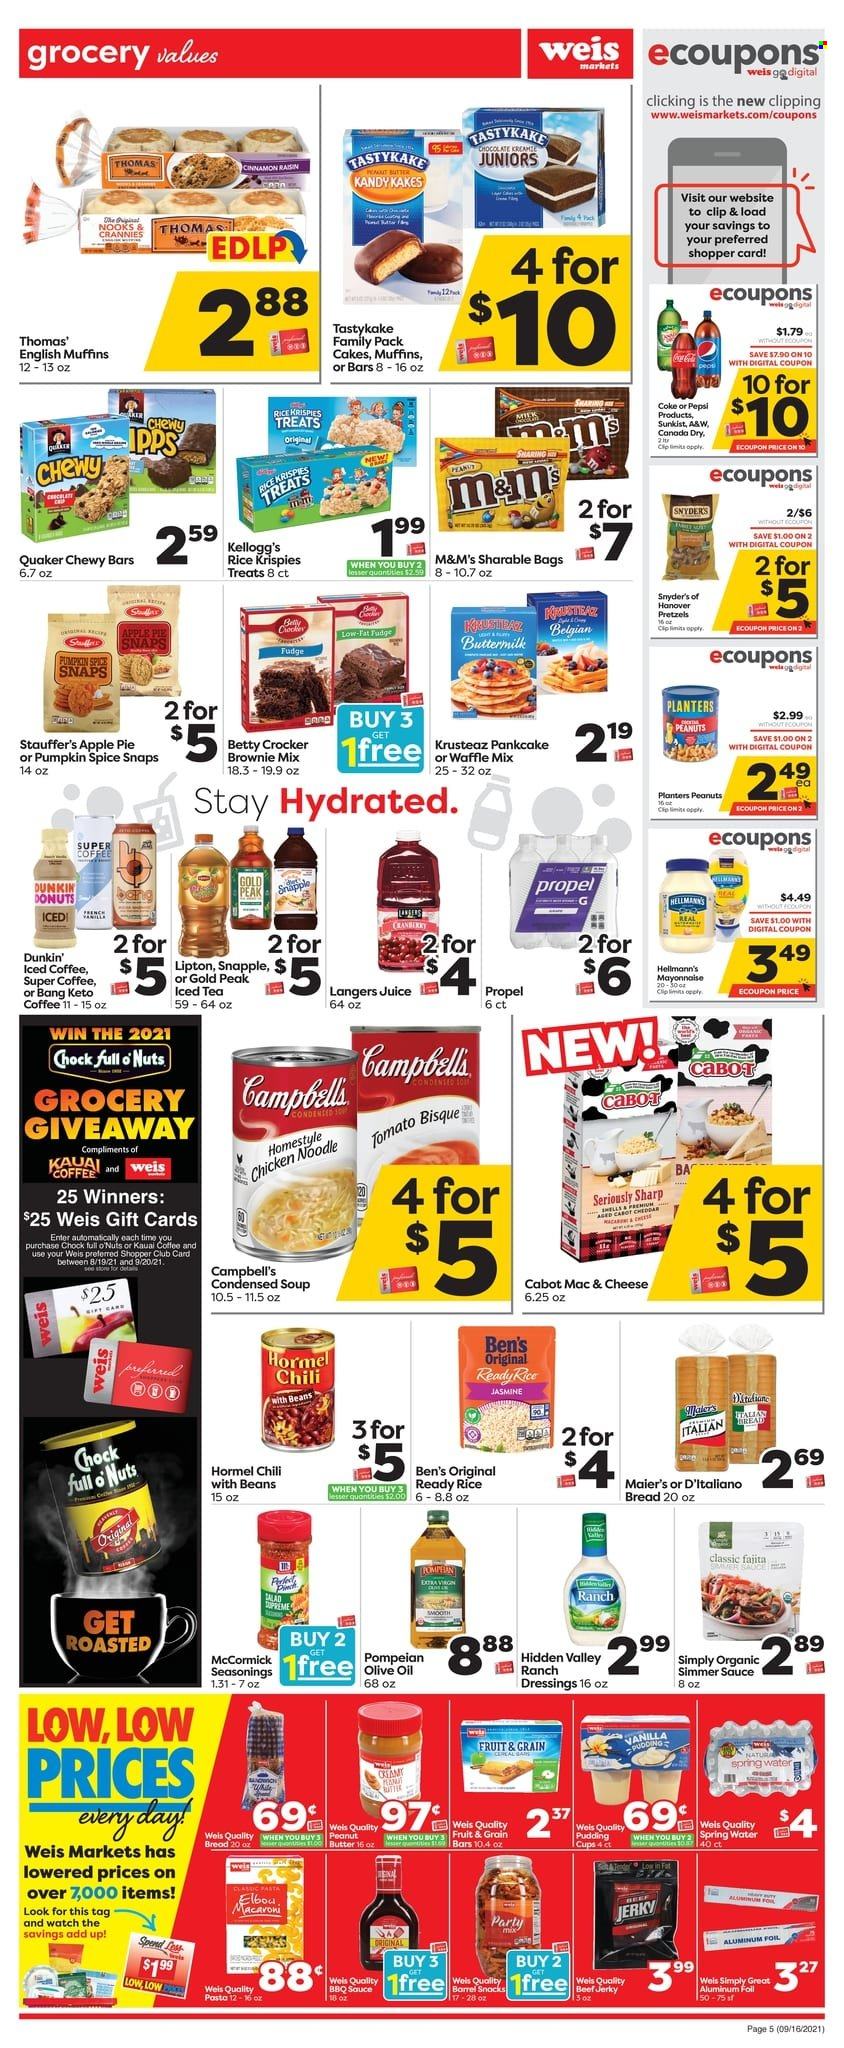 thumbnail - Weis Flyer - 09/16/2021 - 09/23/2021 - Sales products - bread, english muffins, pita, pretzels, cake, pie, apple pie, donut, brownie mix, Campbell's, macaroni, condensed soup, soup, pasta, sauce, fajita, Quaker, noodles, instant soup, Hormel, beef jerky, jerky, pudding, buttermilk, Hellmann’s, fudge, M&M's, Kellogg's, Rice Krispies, spice, olive oil, peanuts, Planters, Canada Dry, Coca-Cola, Pepsi, juice, Lipton, ice tea, Snapple, A&W, spring water, iced coffee, aluminium foil. Page 5.